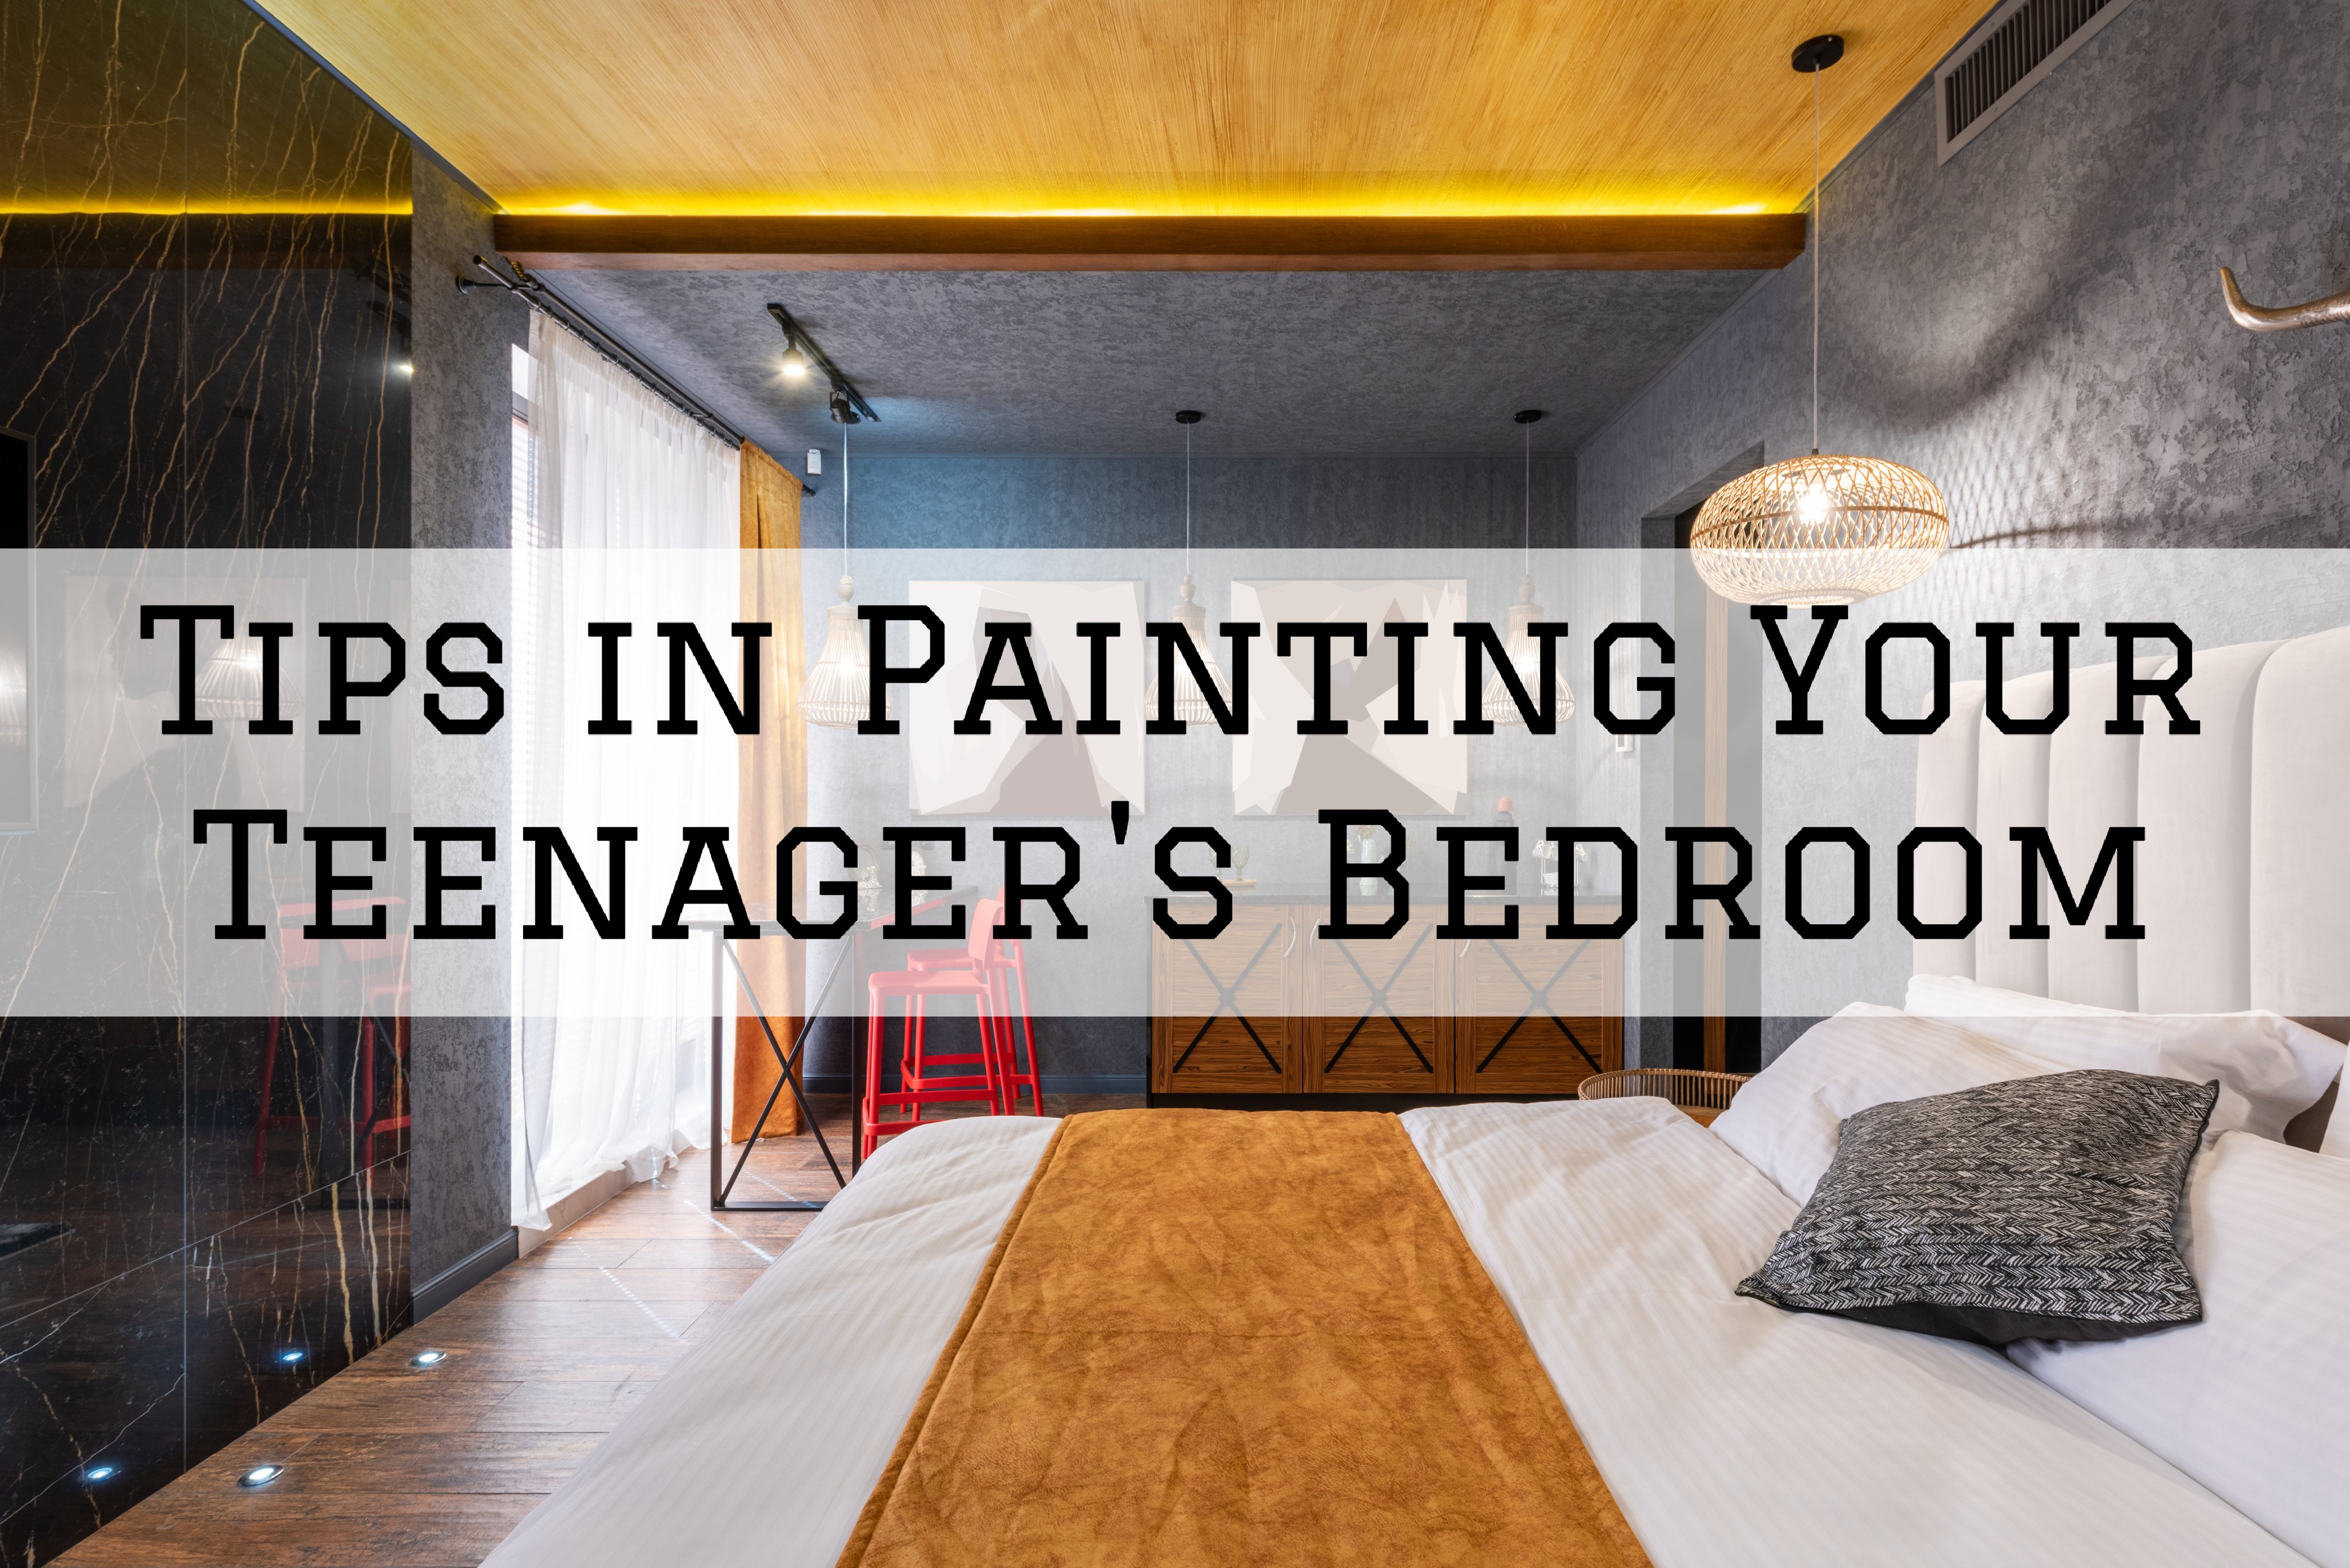 2022-04-08 The Painting and Wallcovering Shamong NJ Tips in Painting Your Teenager's Bedroom